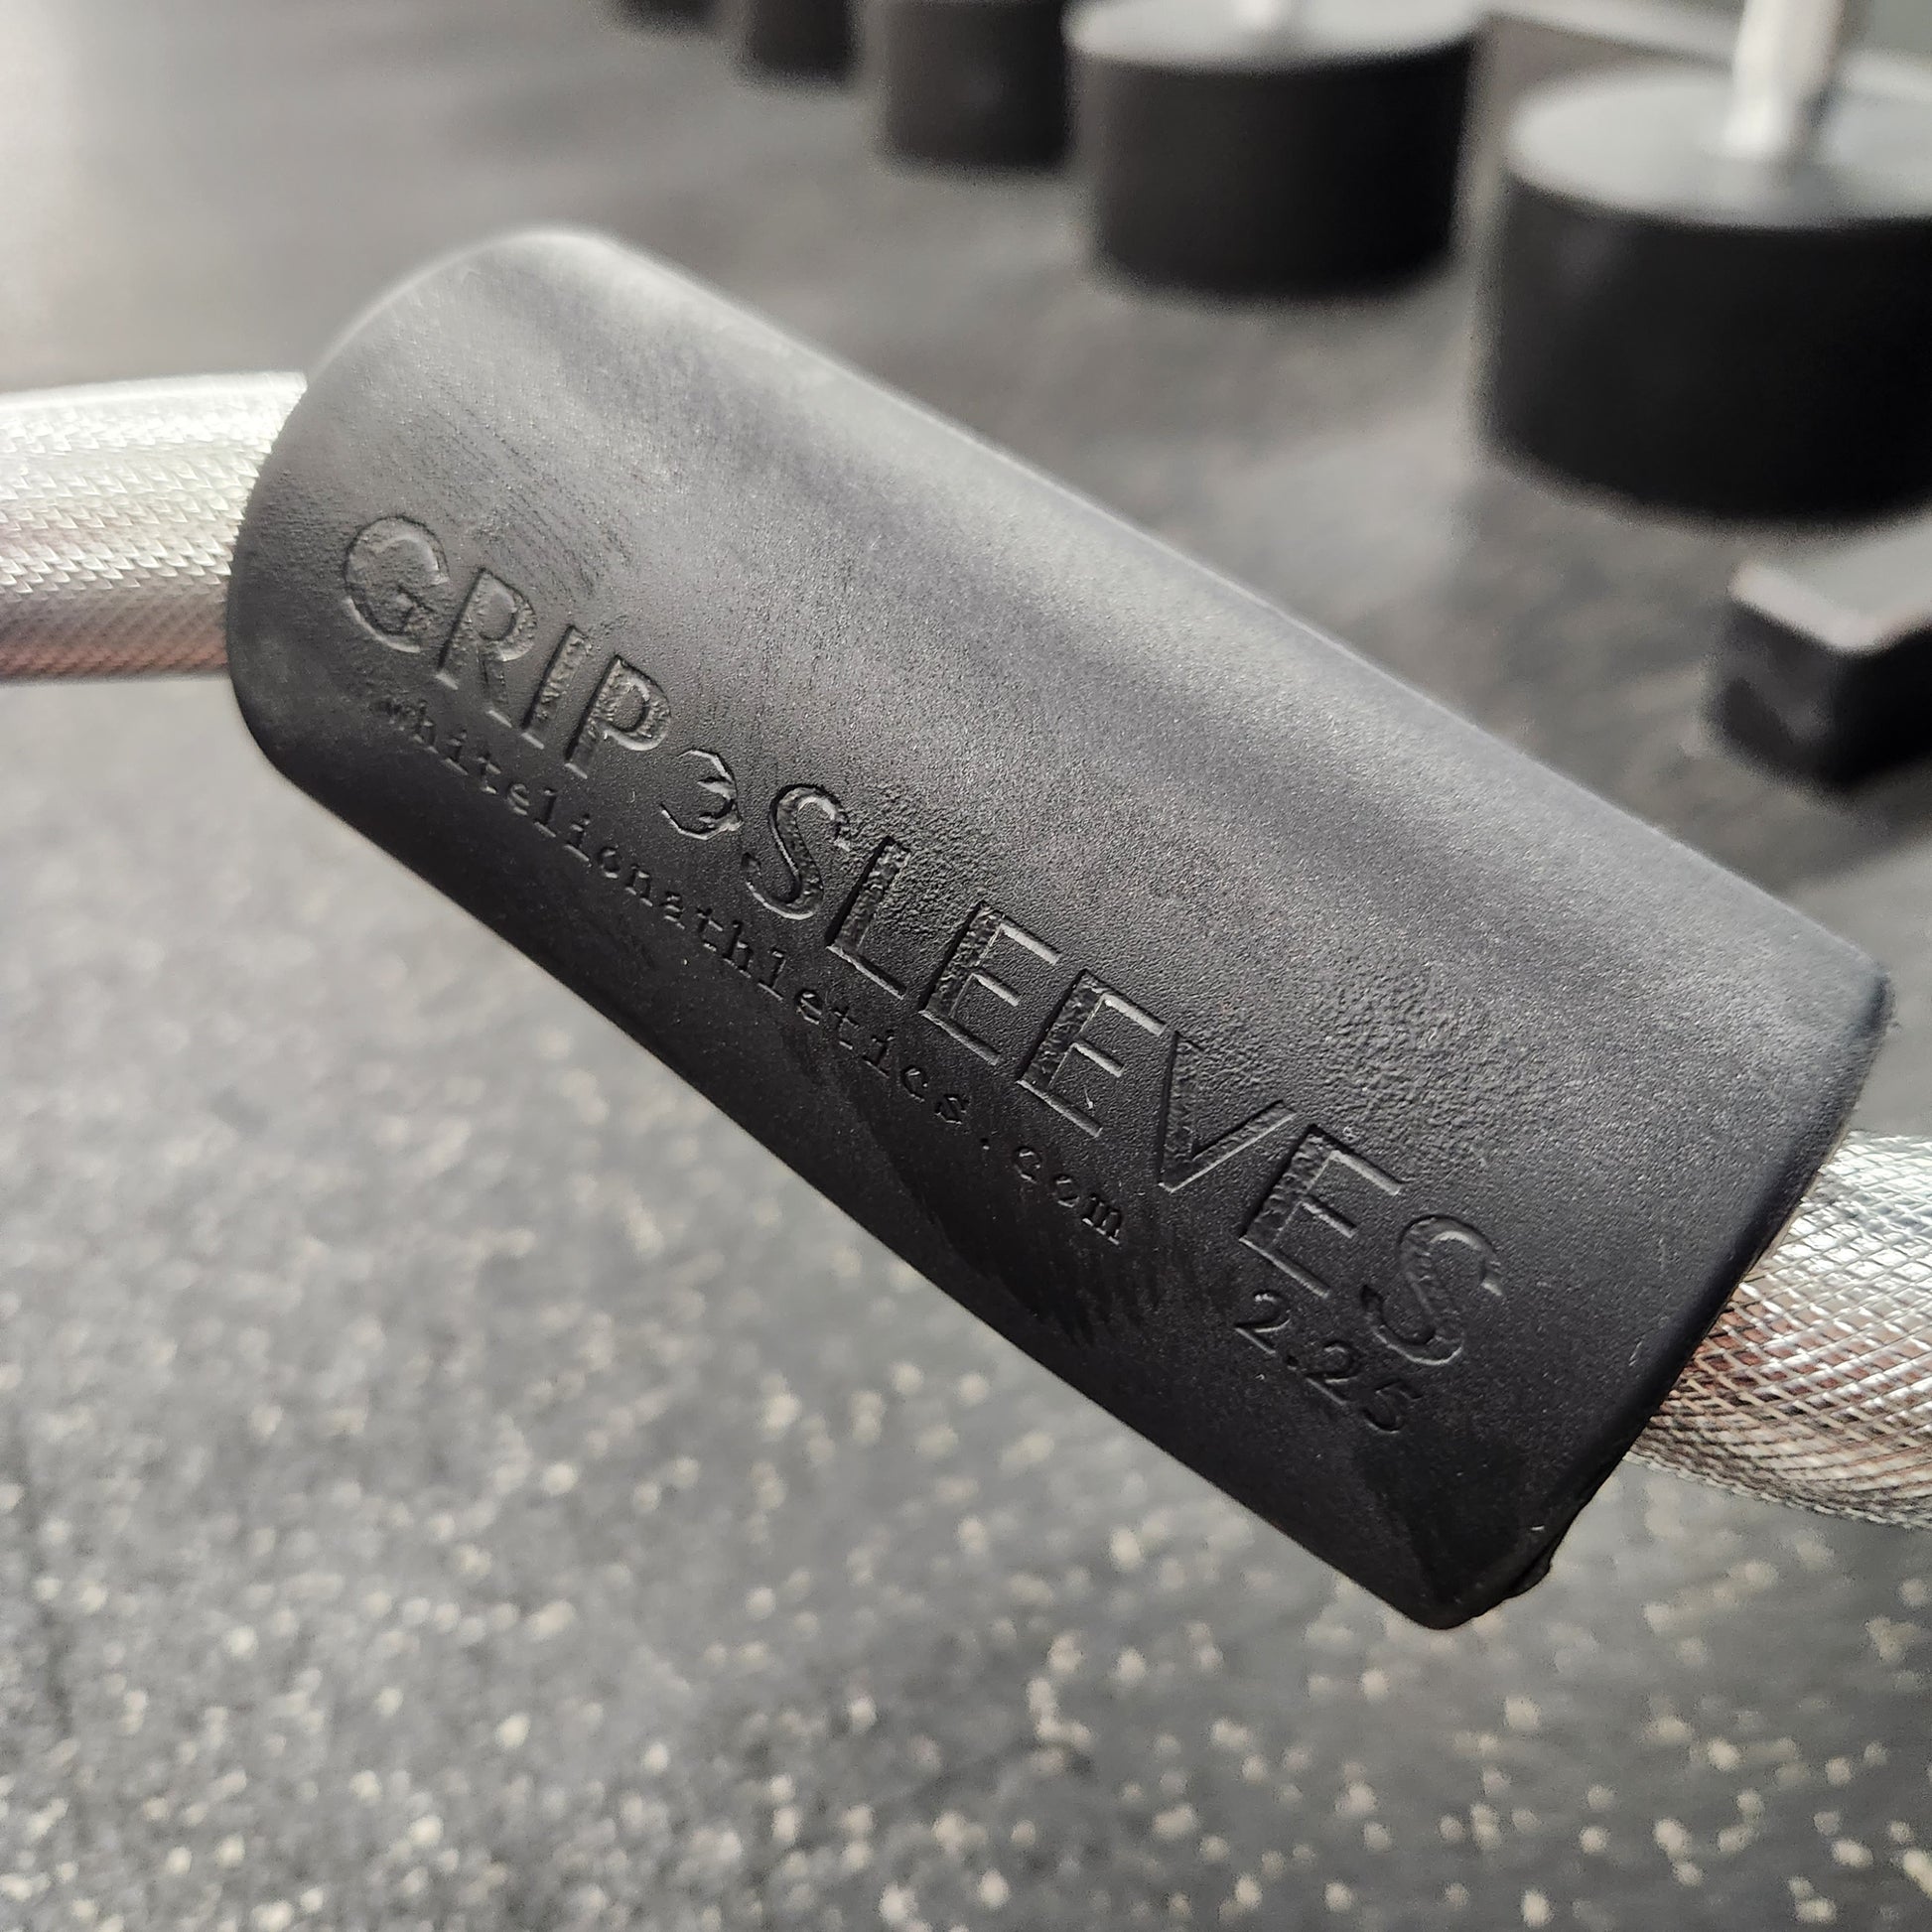 2.25" Grip Sleeves by White Lion Athletics being used on Ez-Curl  barbell